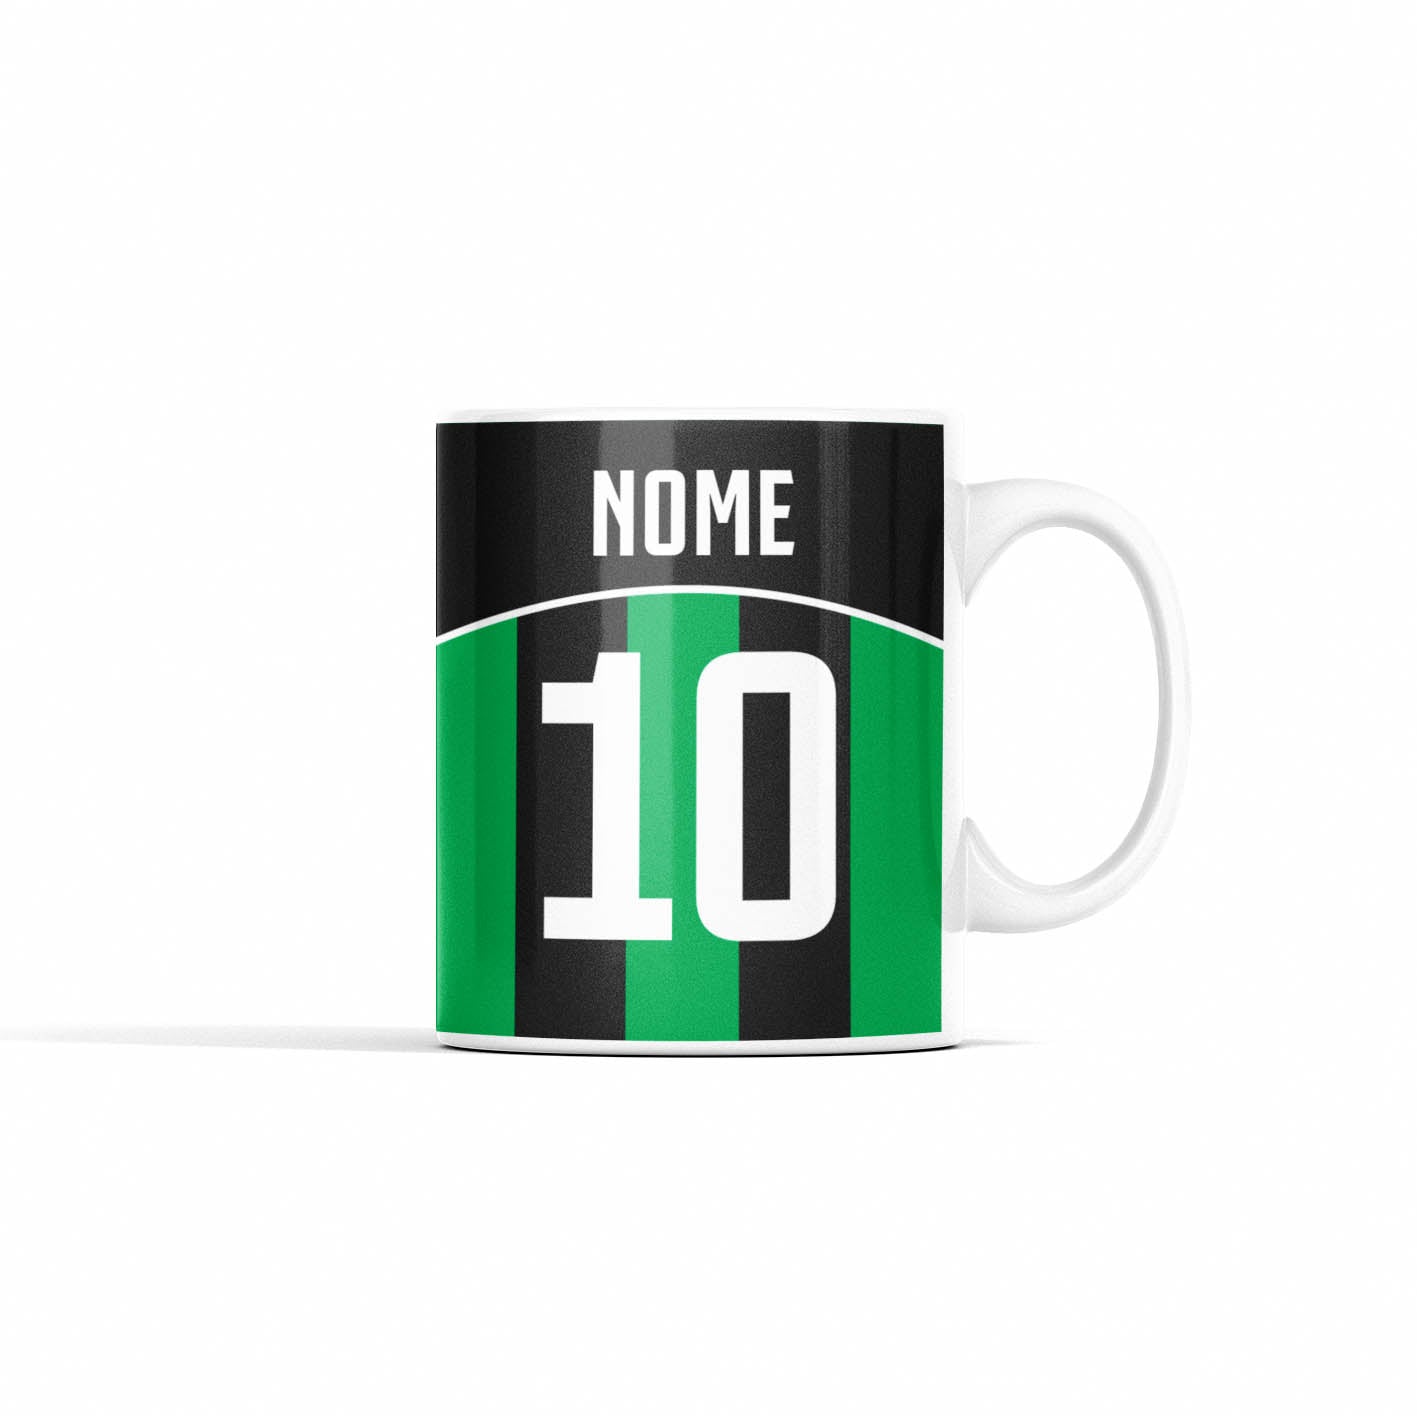 Sassuolo mug personalized with name and number 